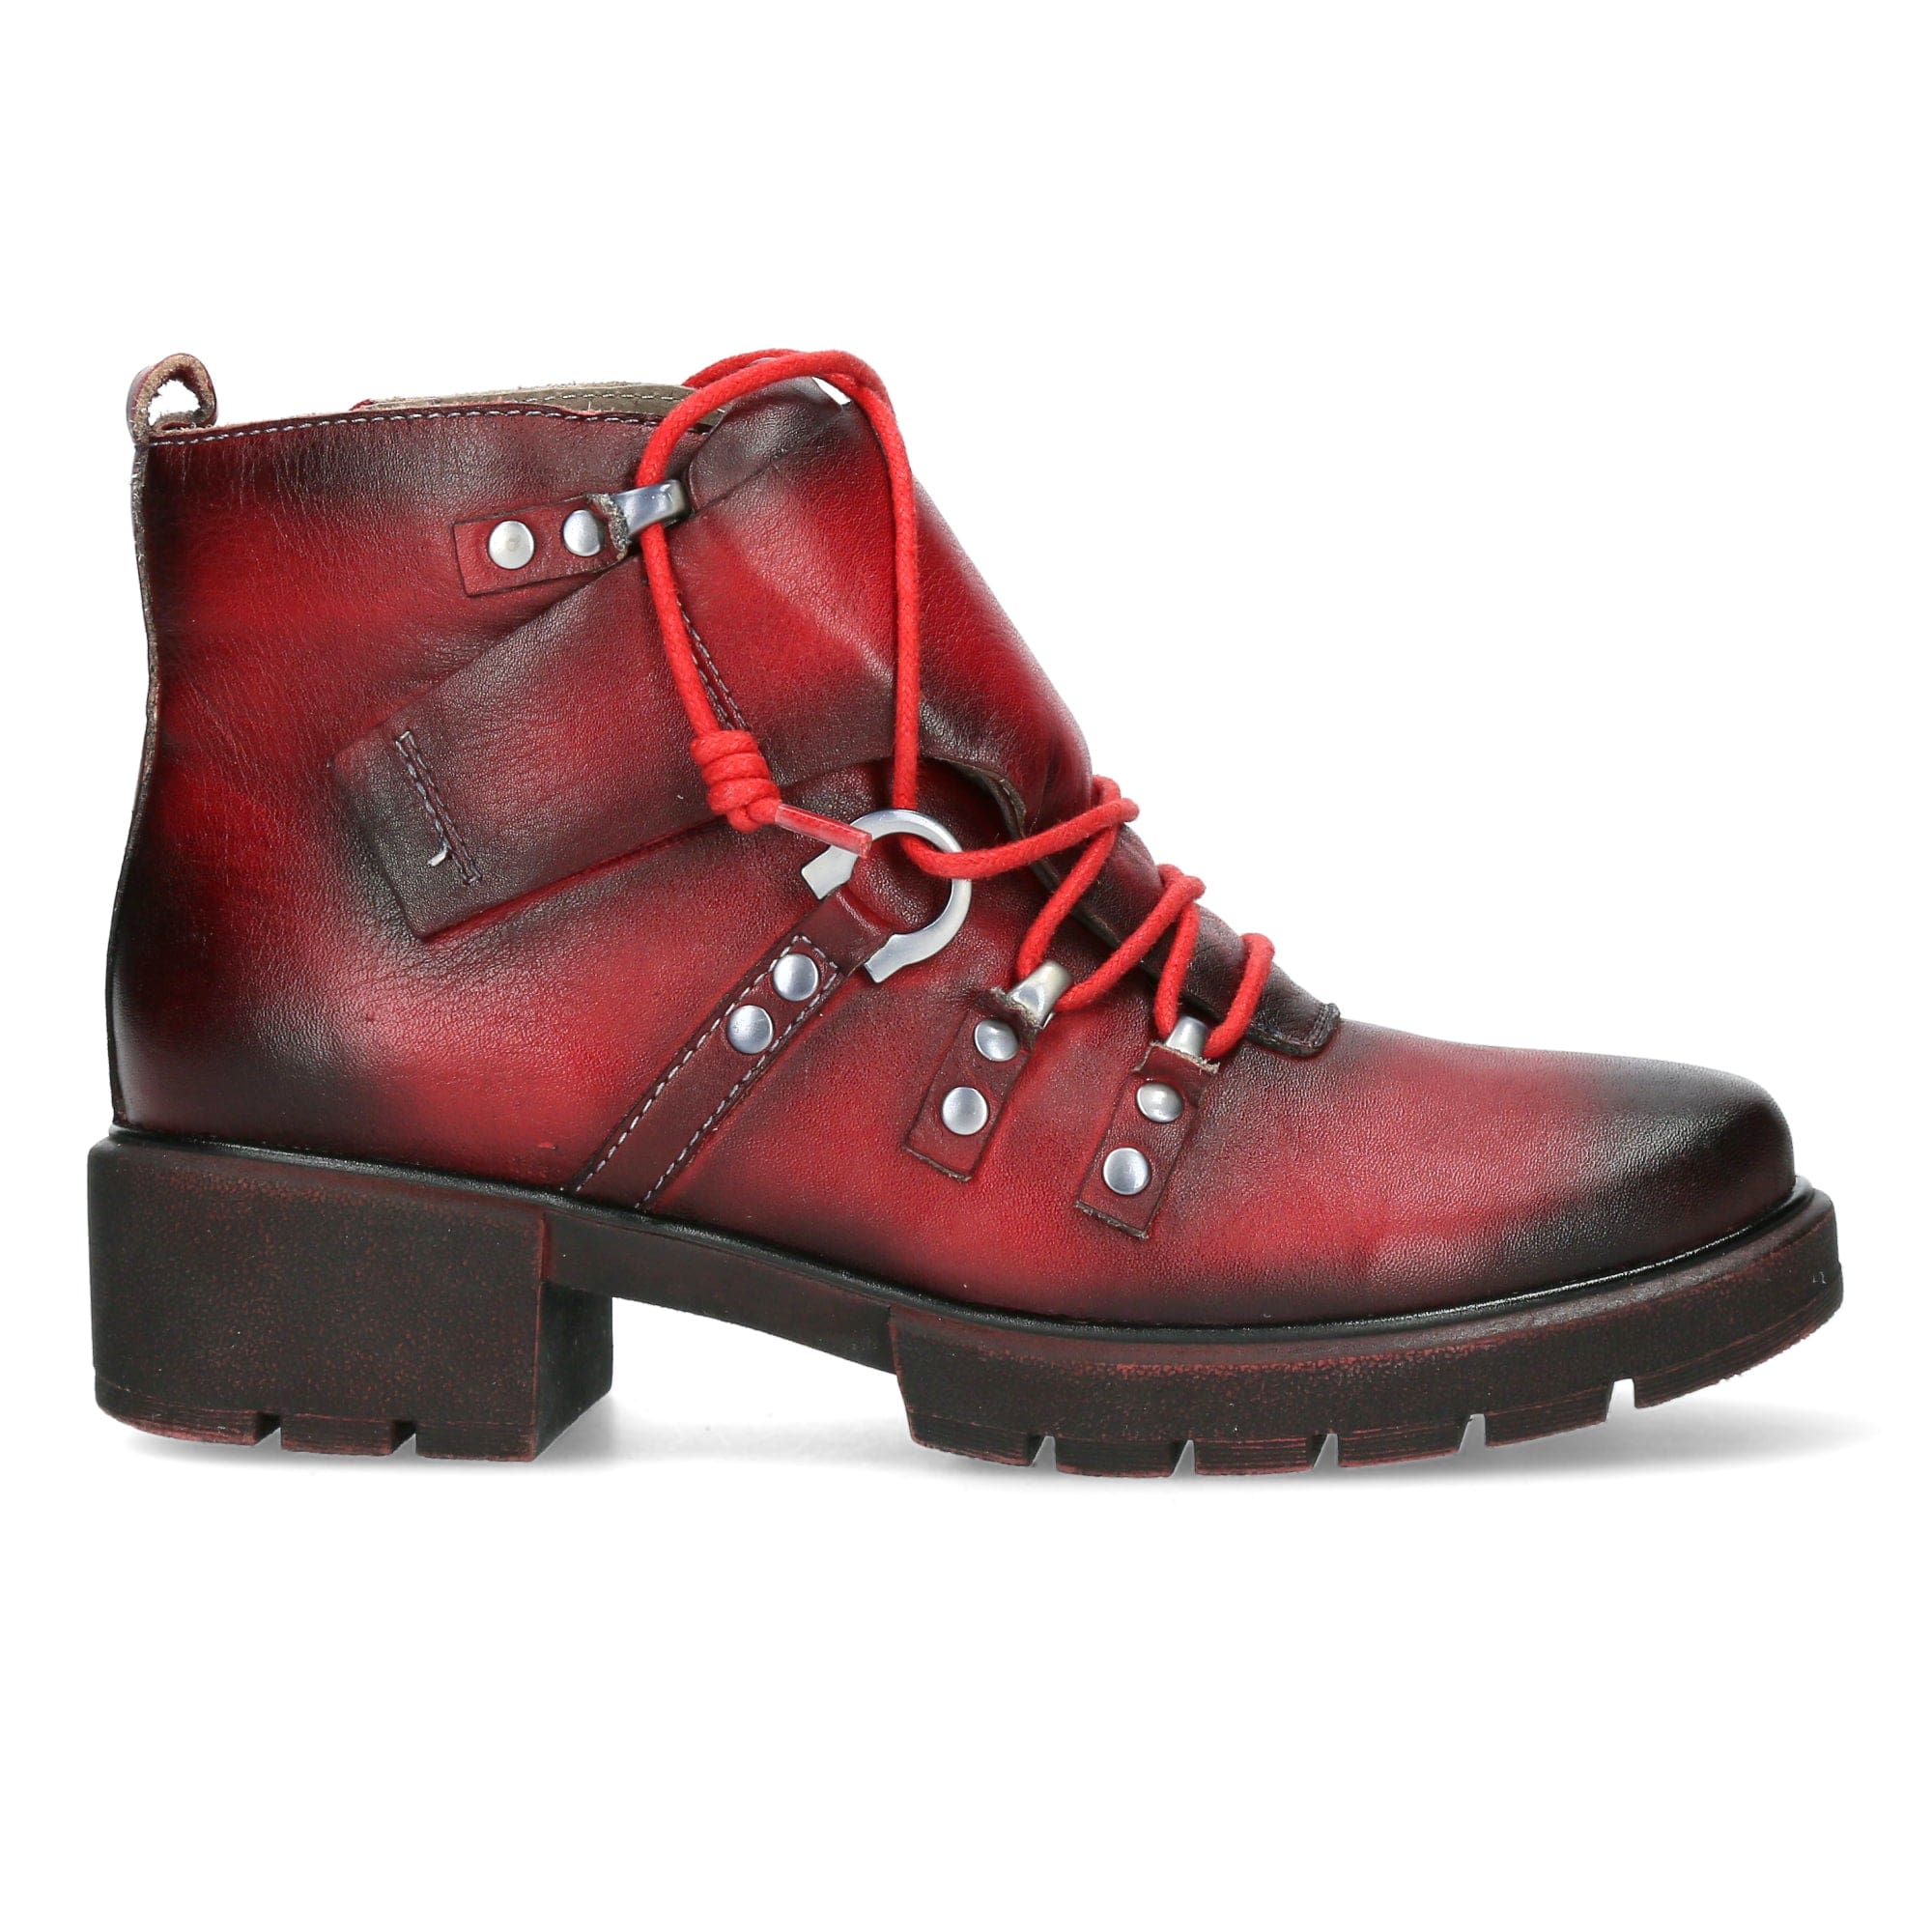 Chaussure IDCEAO 06 - 35 / Rouge - Boots